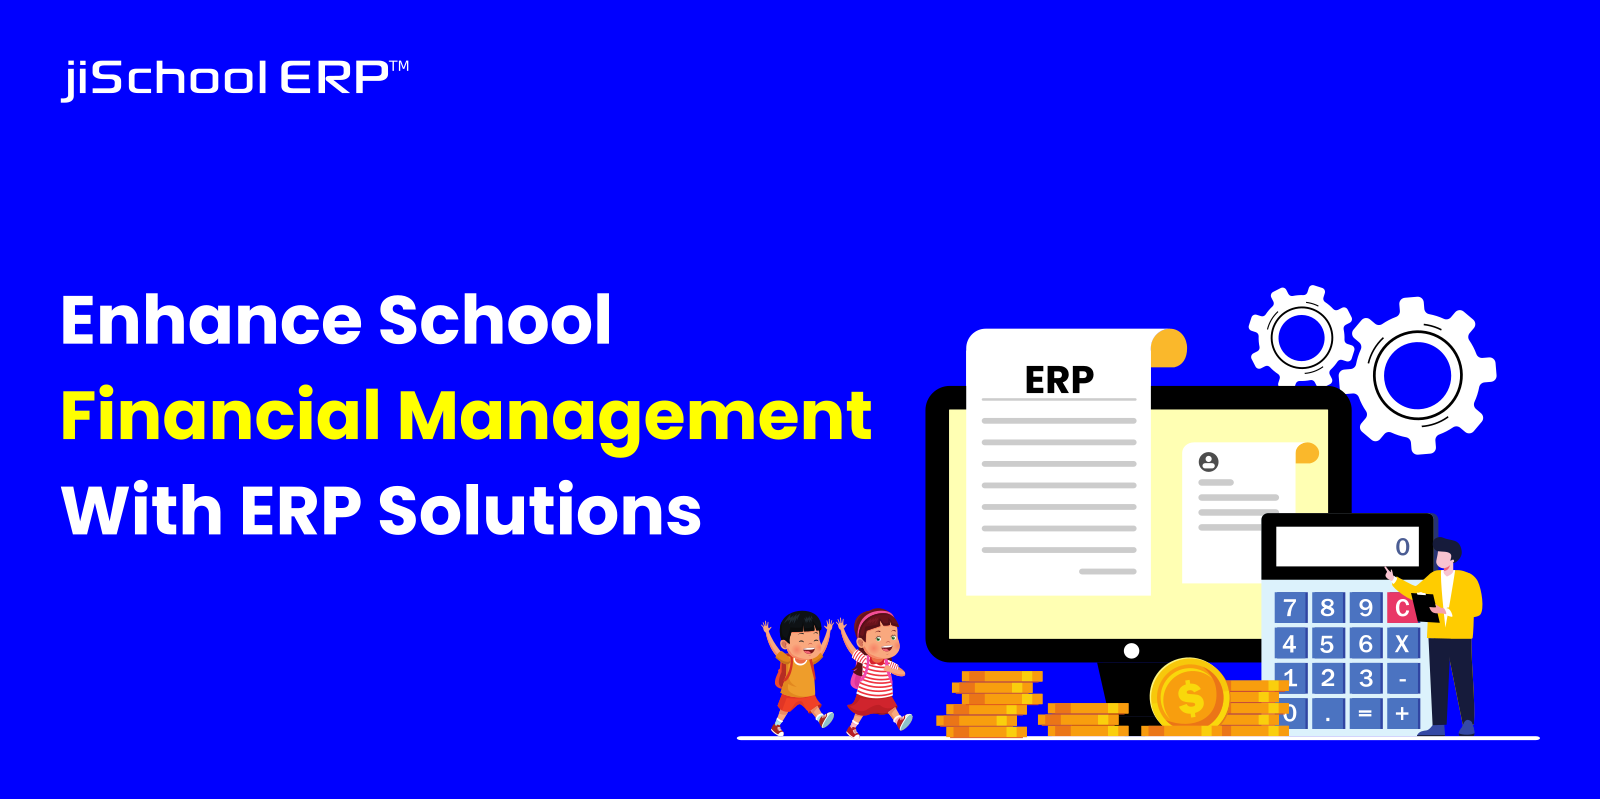 Enhance School Financial Management with ERP Solutions